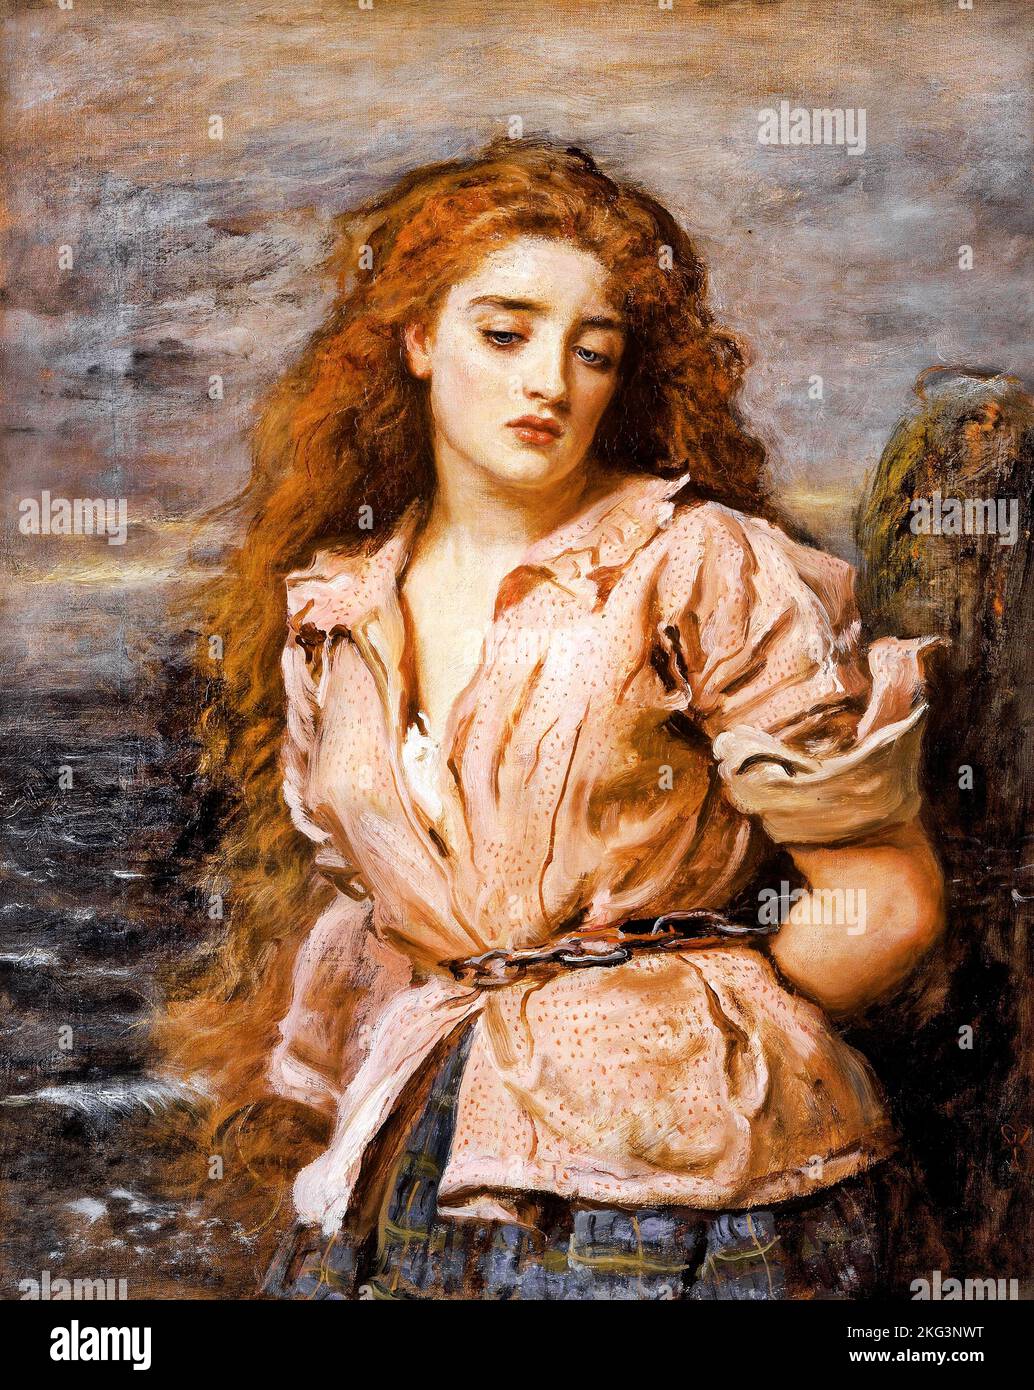 John Everett Millais; The Martyr of the Solway; Circa 1871; Oil on canvas; Walker Art Gallery, Liverpool, England. Stock Photo